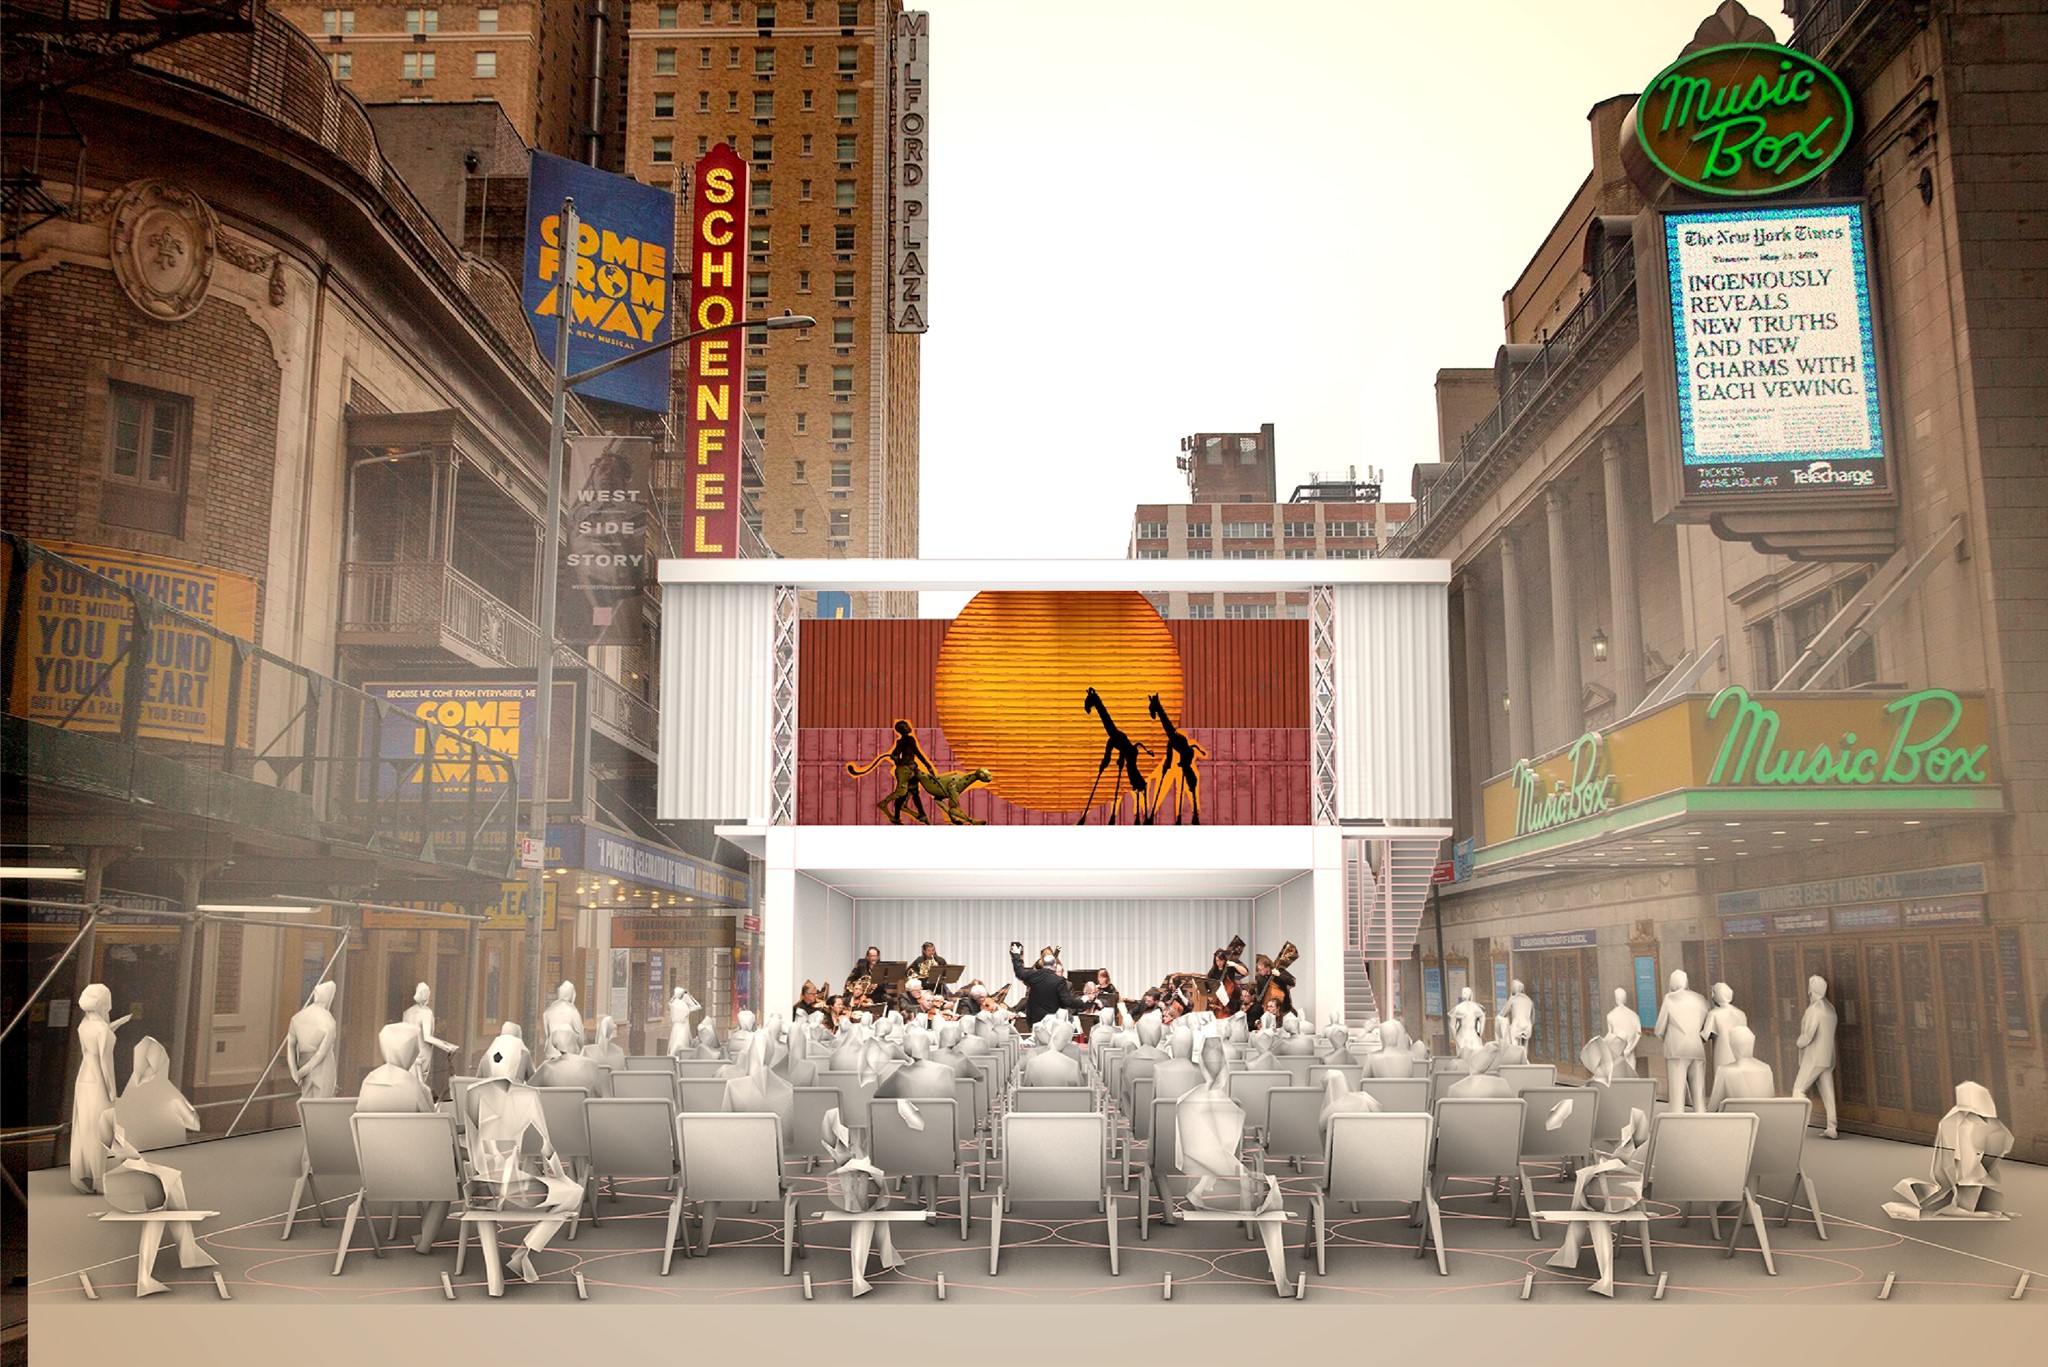 Shipping container theater